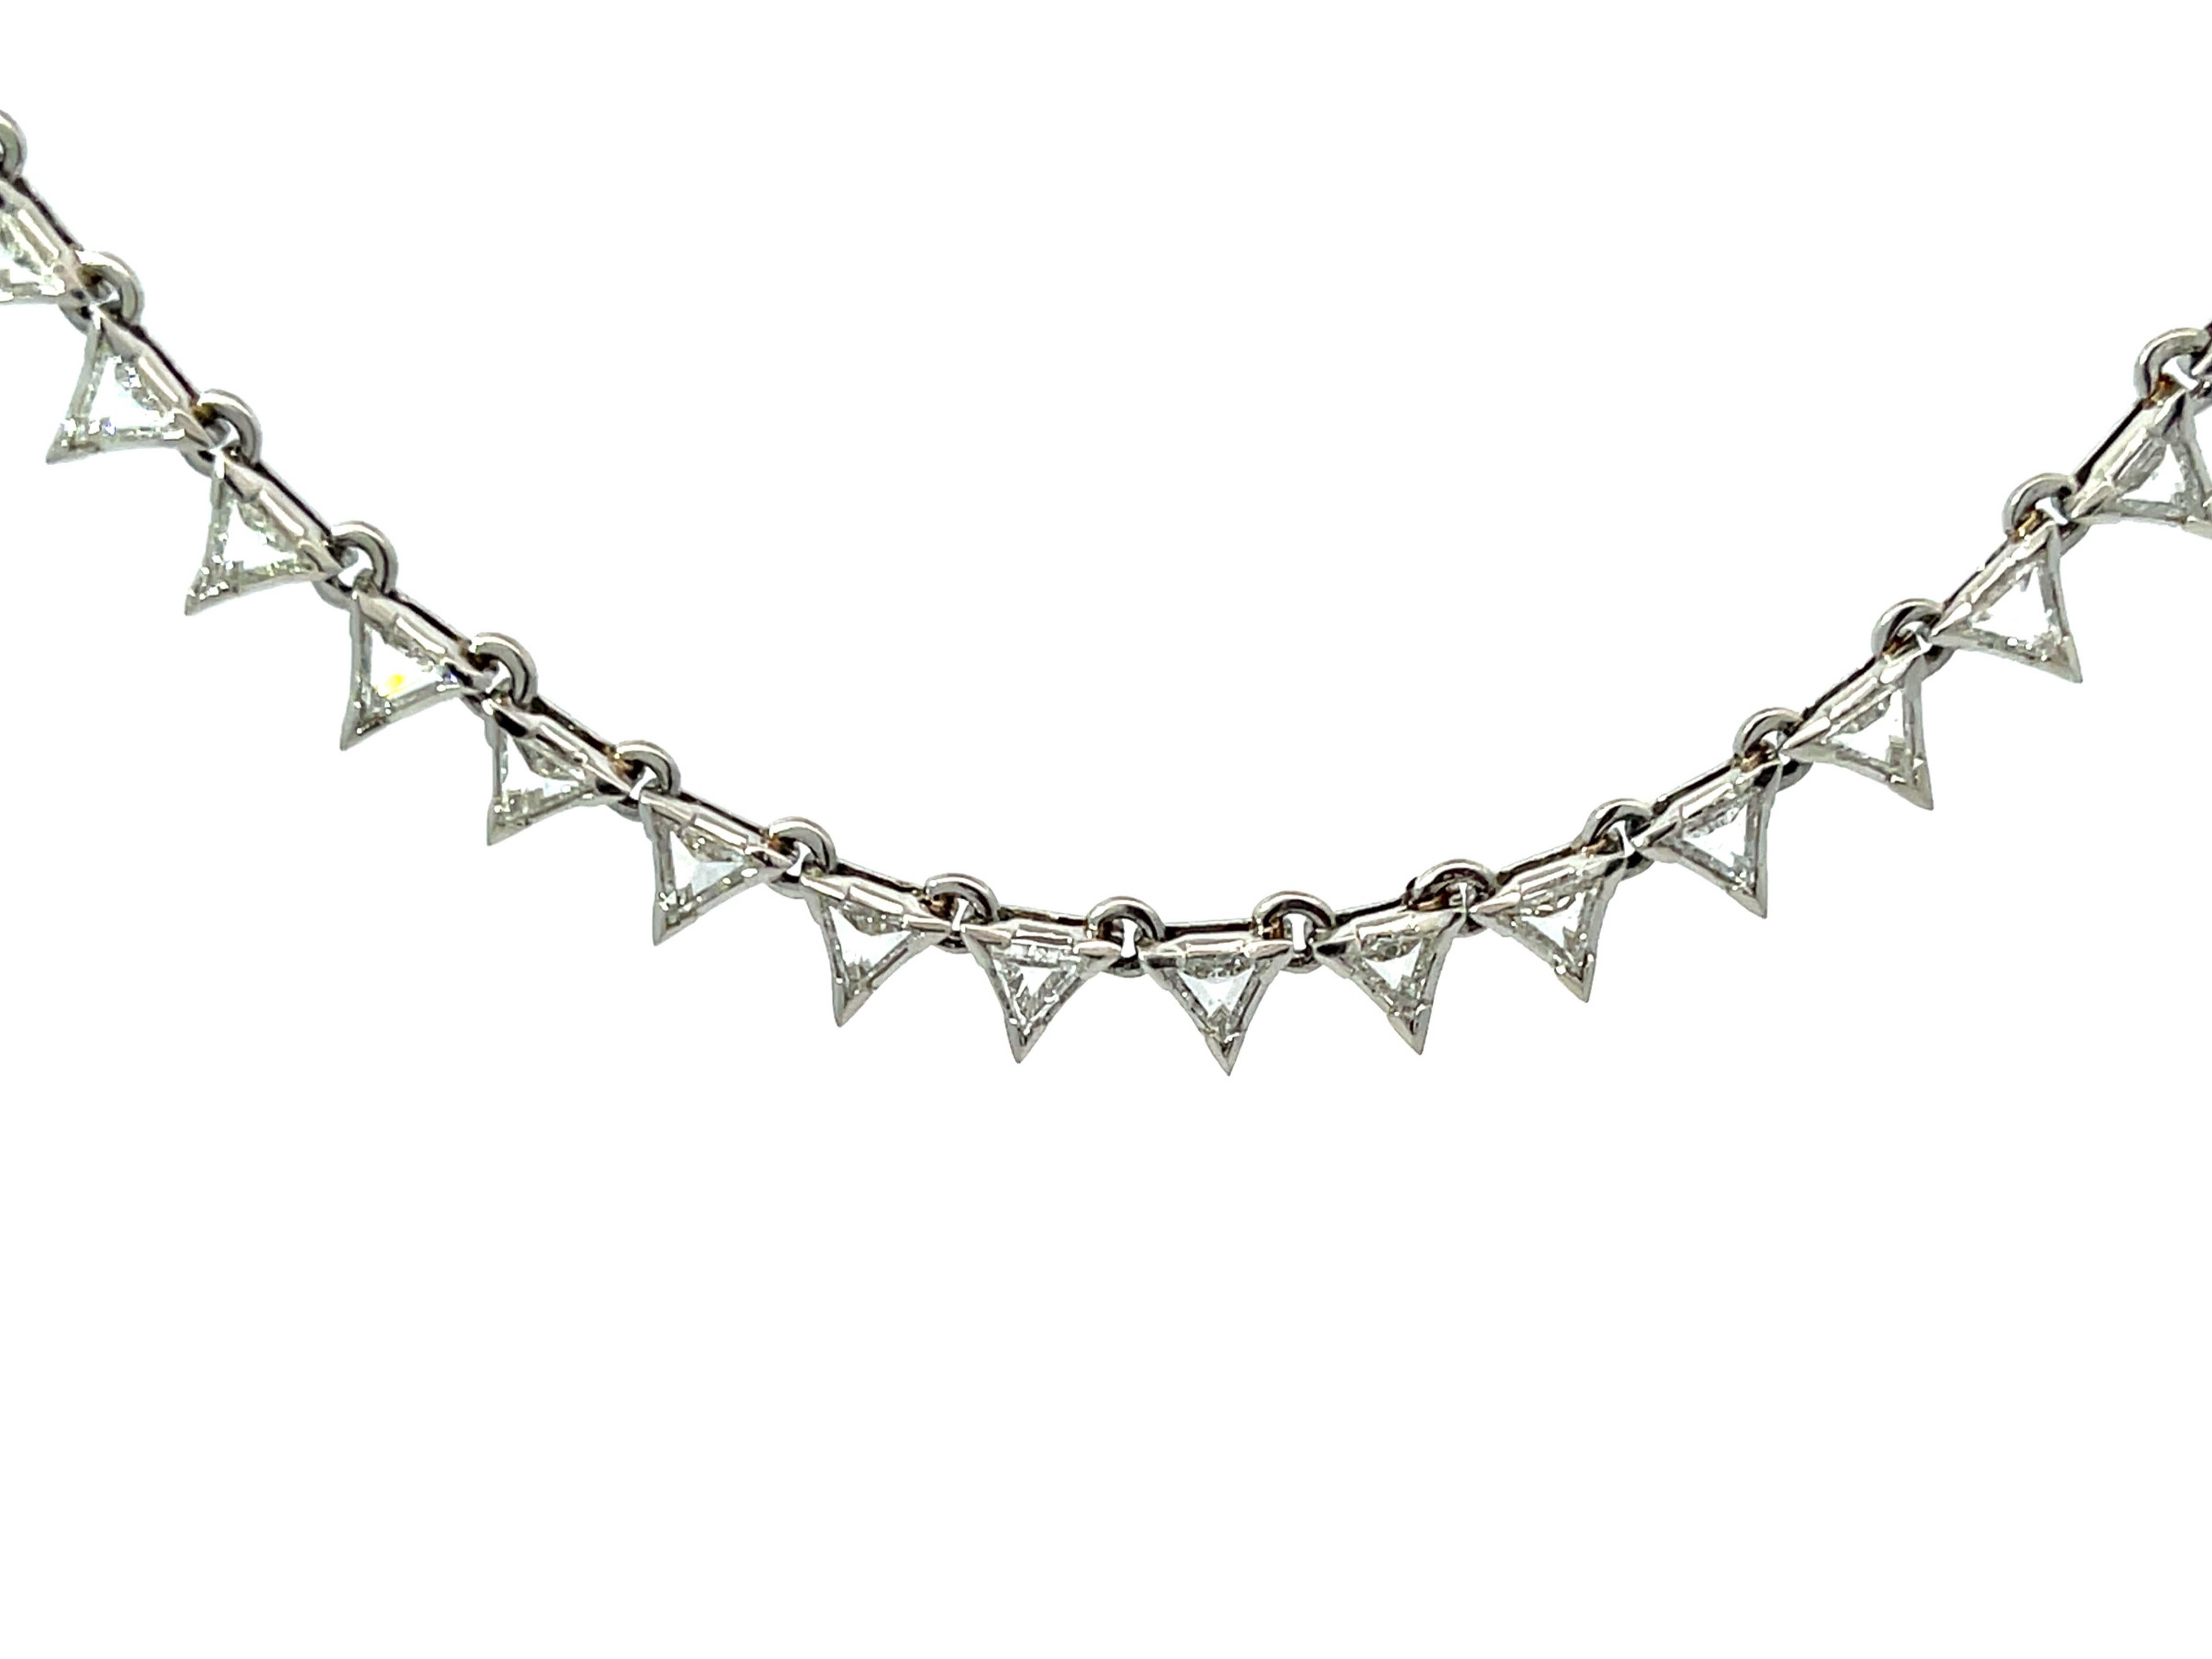 Trillion 9.72ctw Diamond Choker Necklace in Platinum In Excellent Condition For Sale In Honolulu, HI